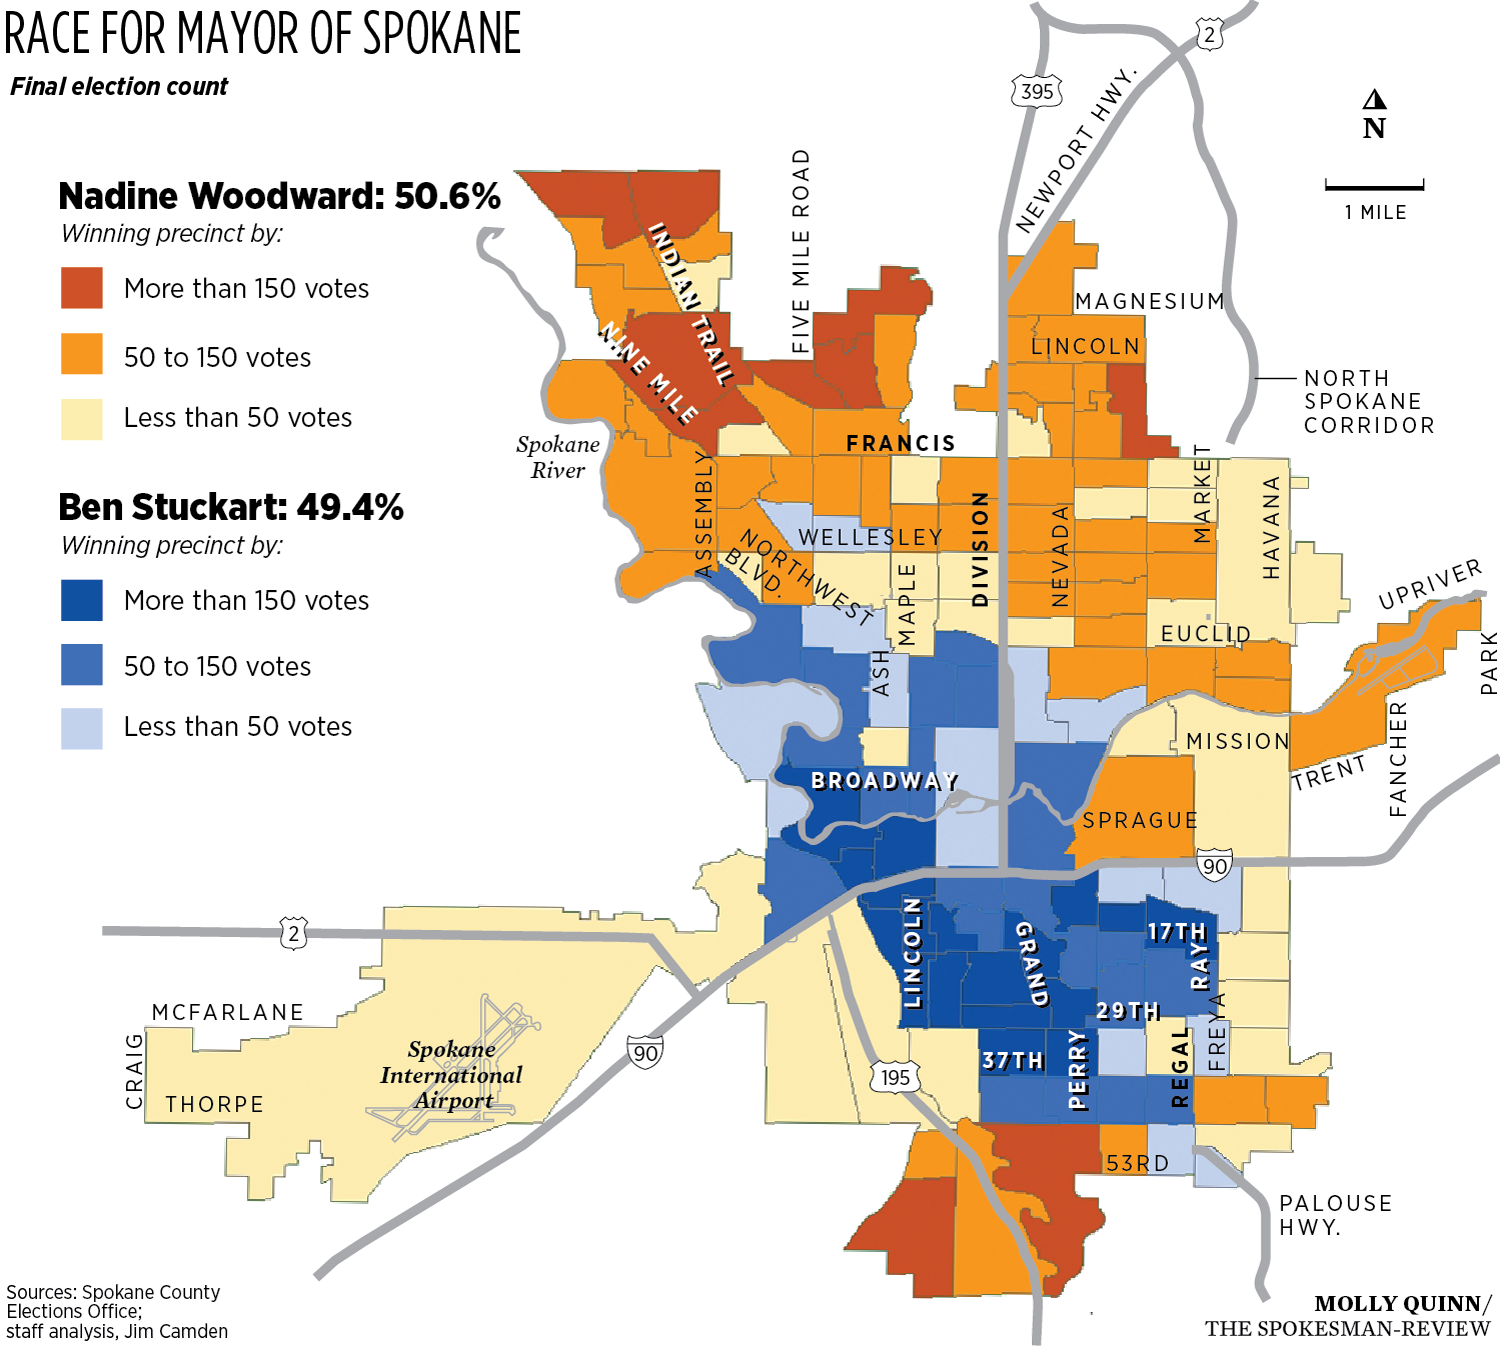 map of spokane wa 12 Maps That Tell The Story Of The 2019 Election In Spokane The